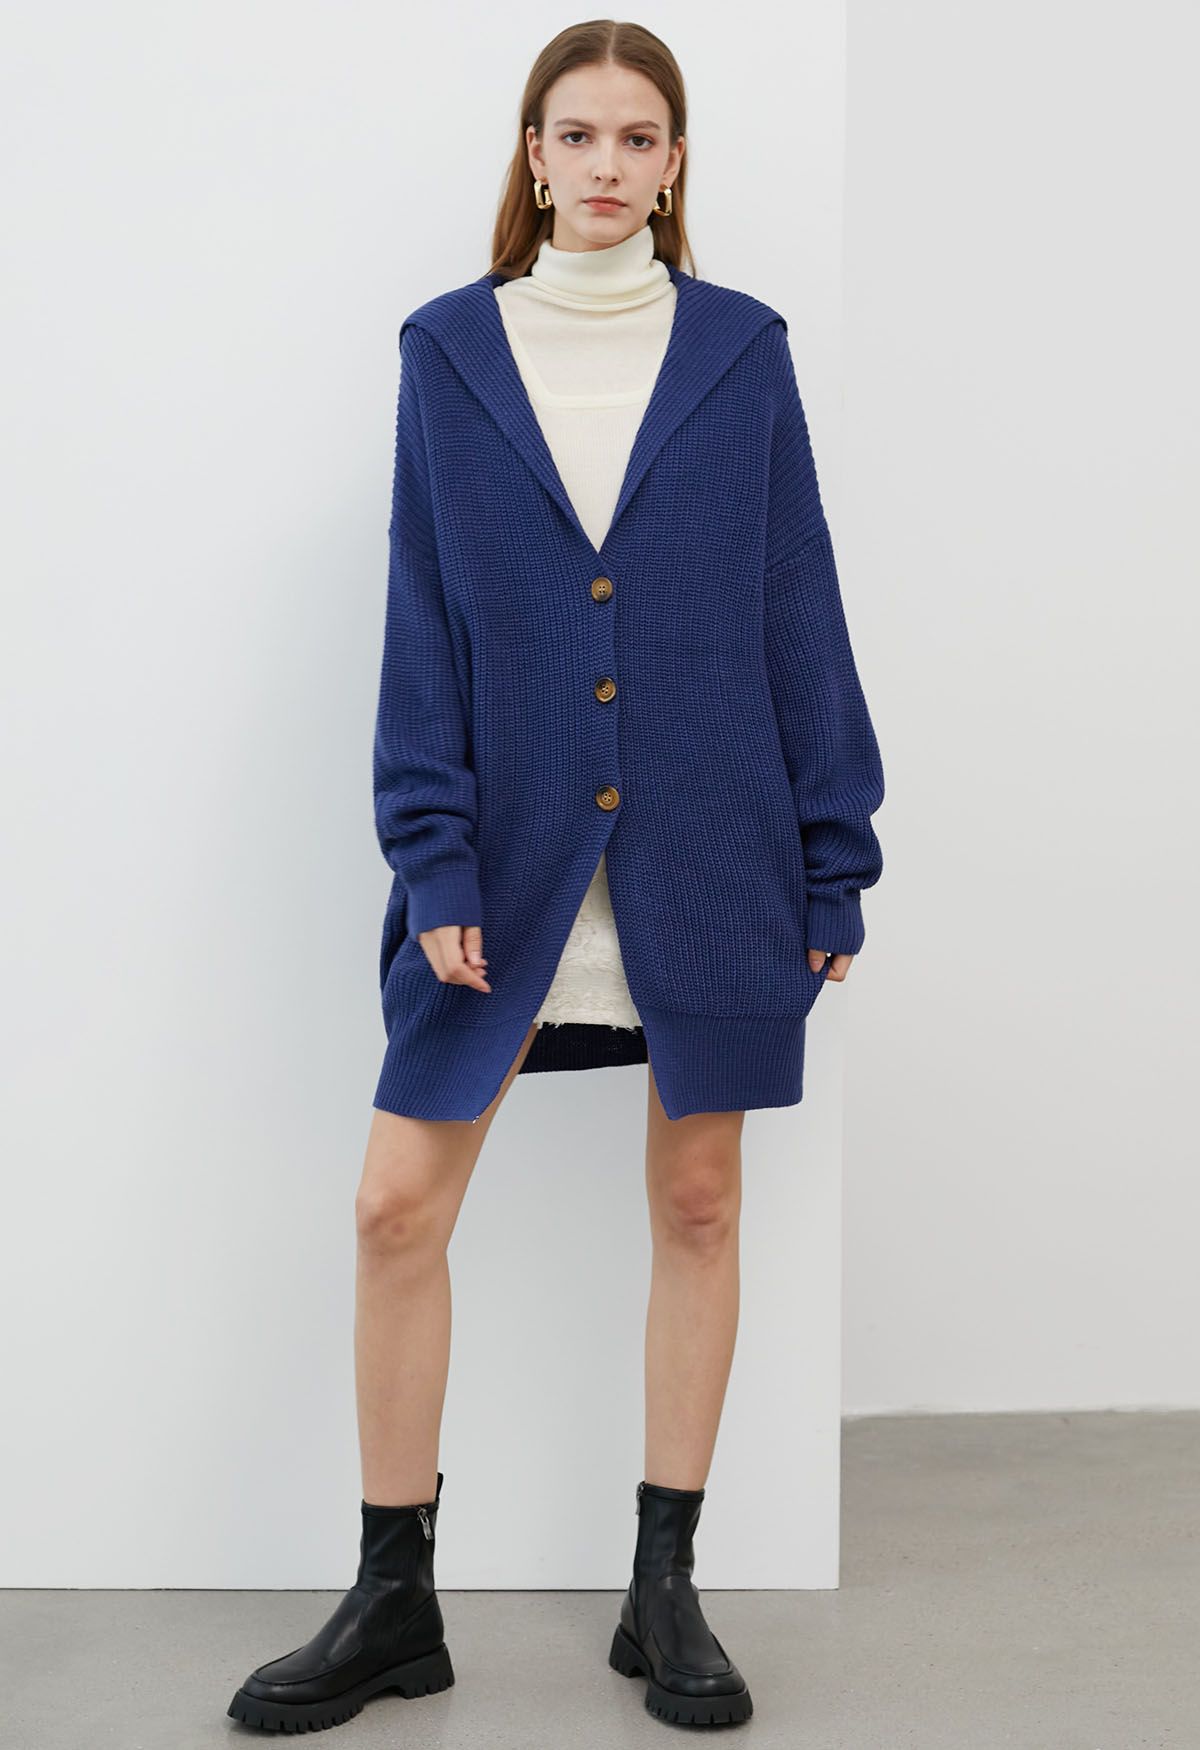 Flap Collar Button Down Longline Knit Cardigan in Navy